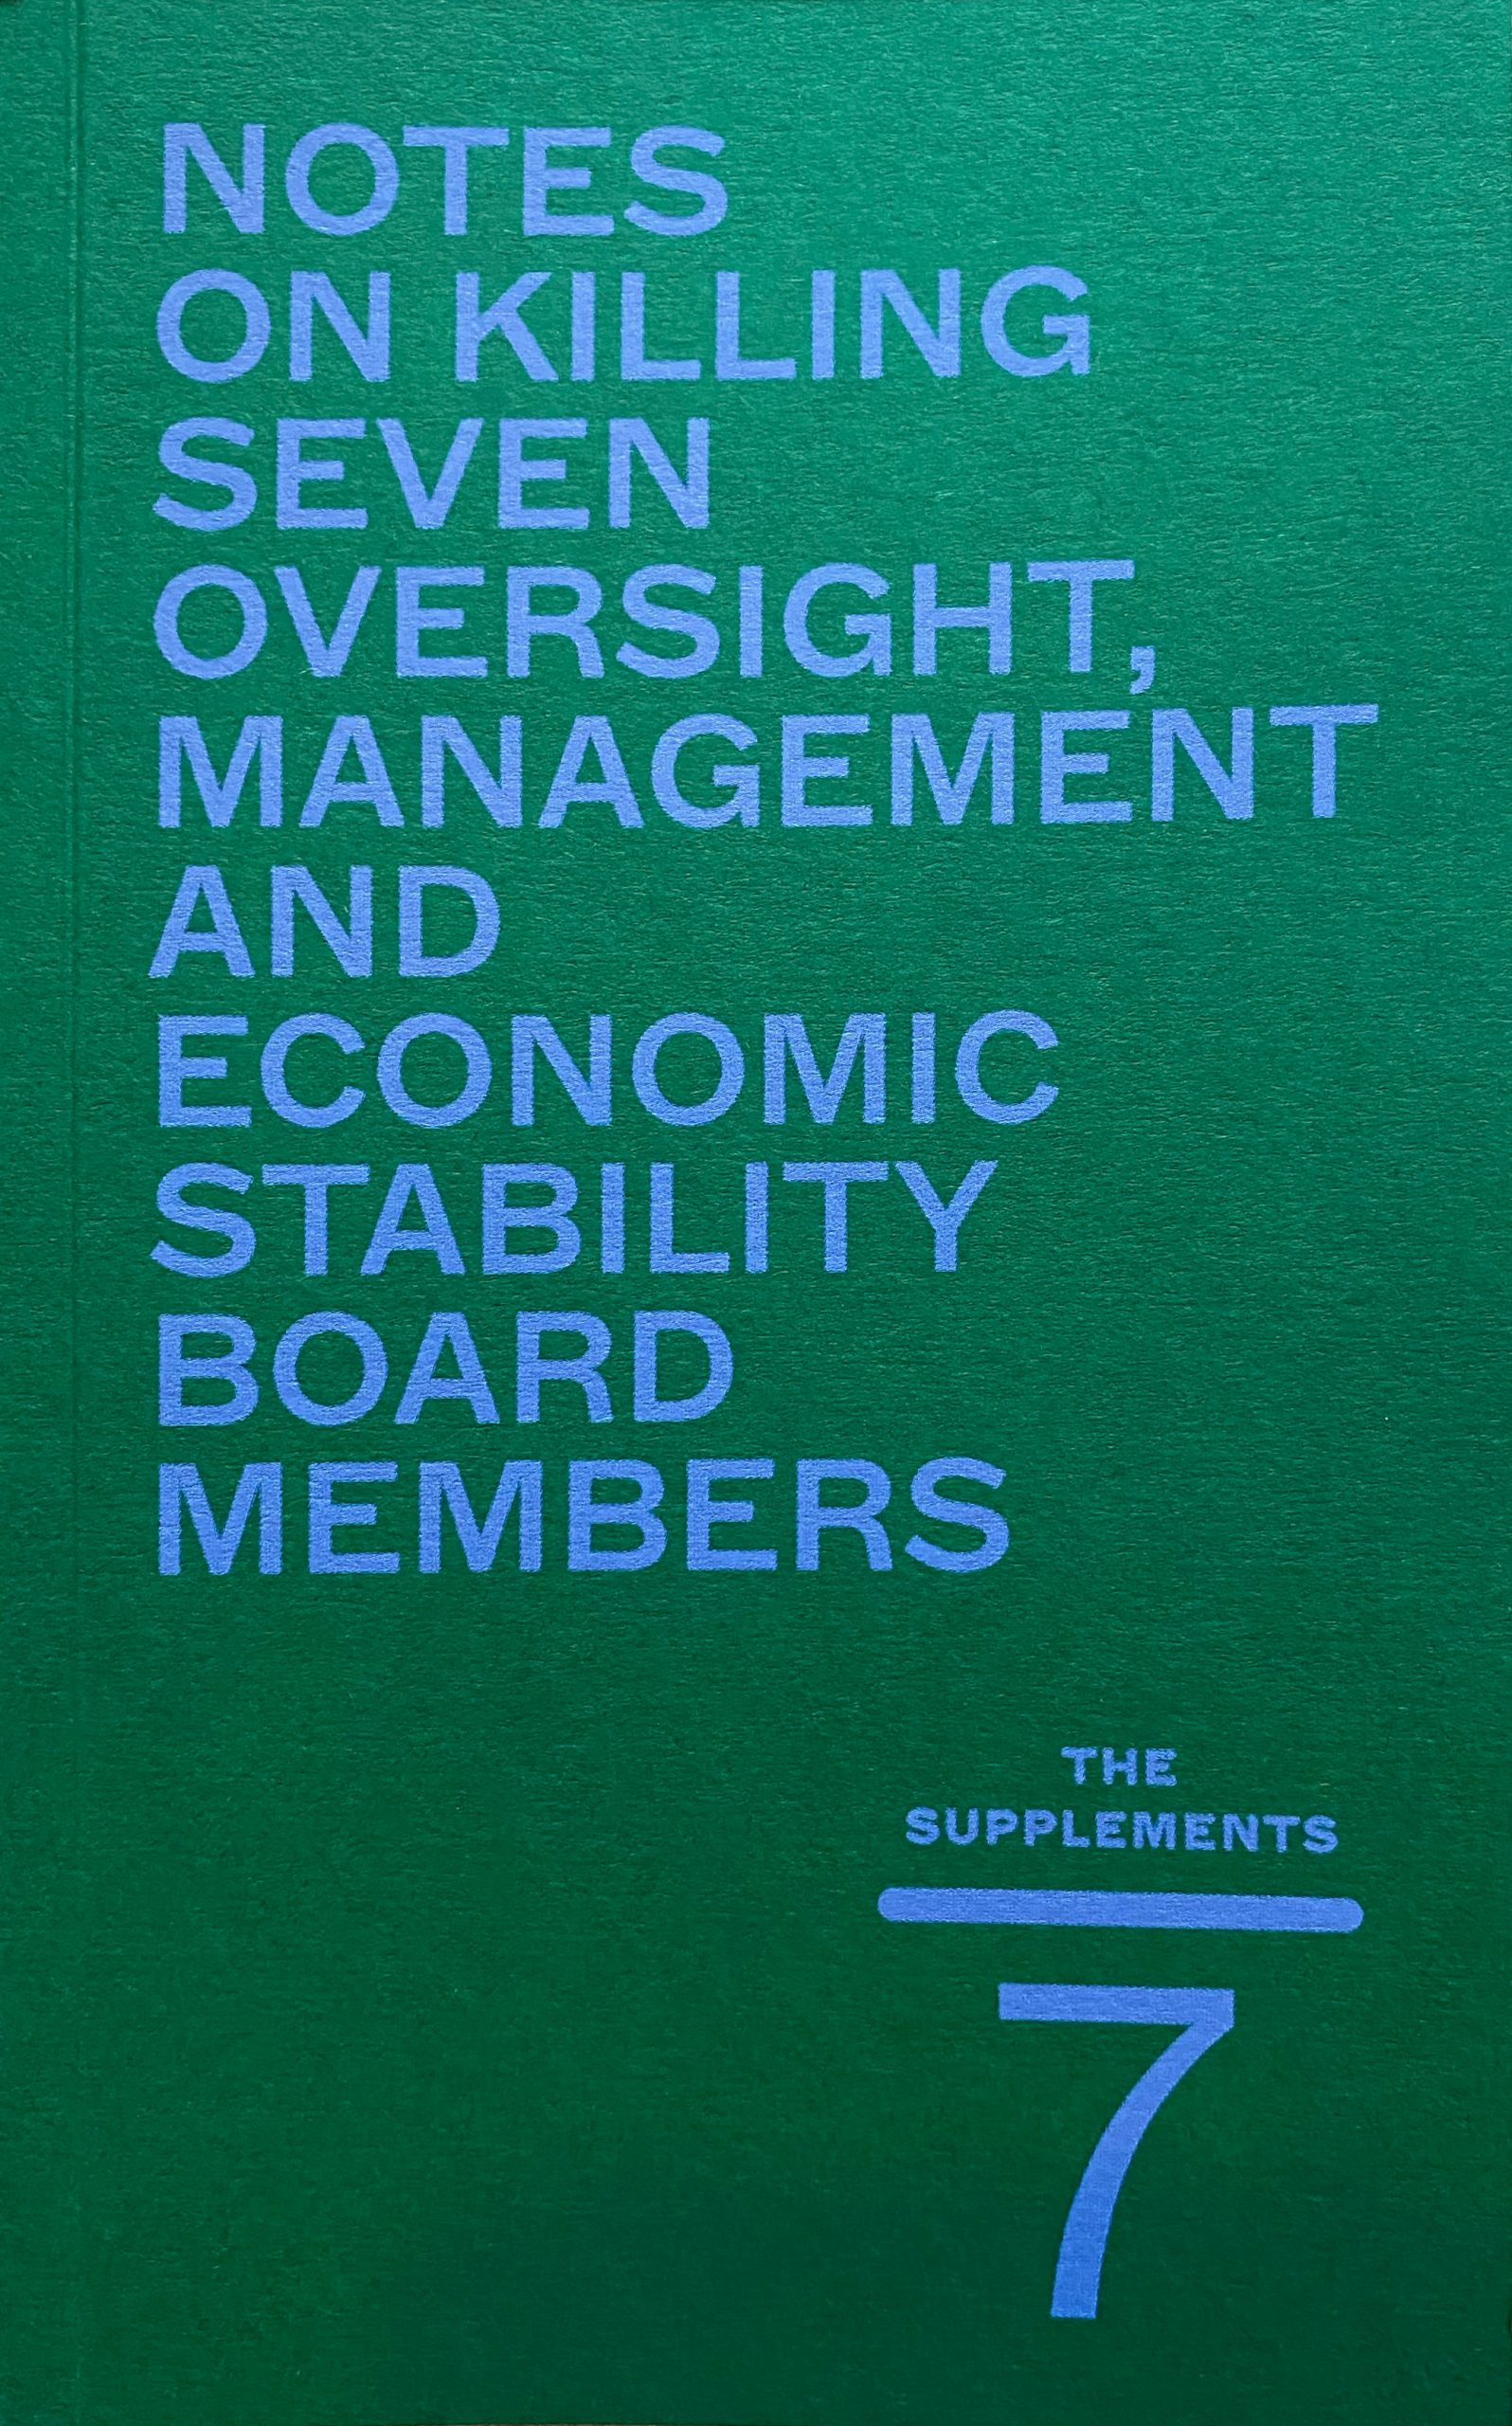 The Supplements: Notes on Killing Seven Oversight, Management and Economic Stability Board Members